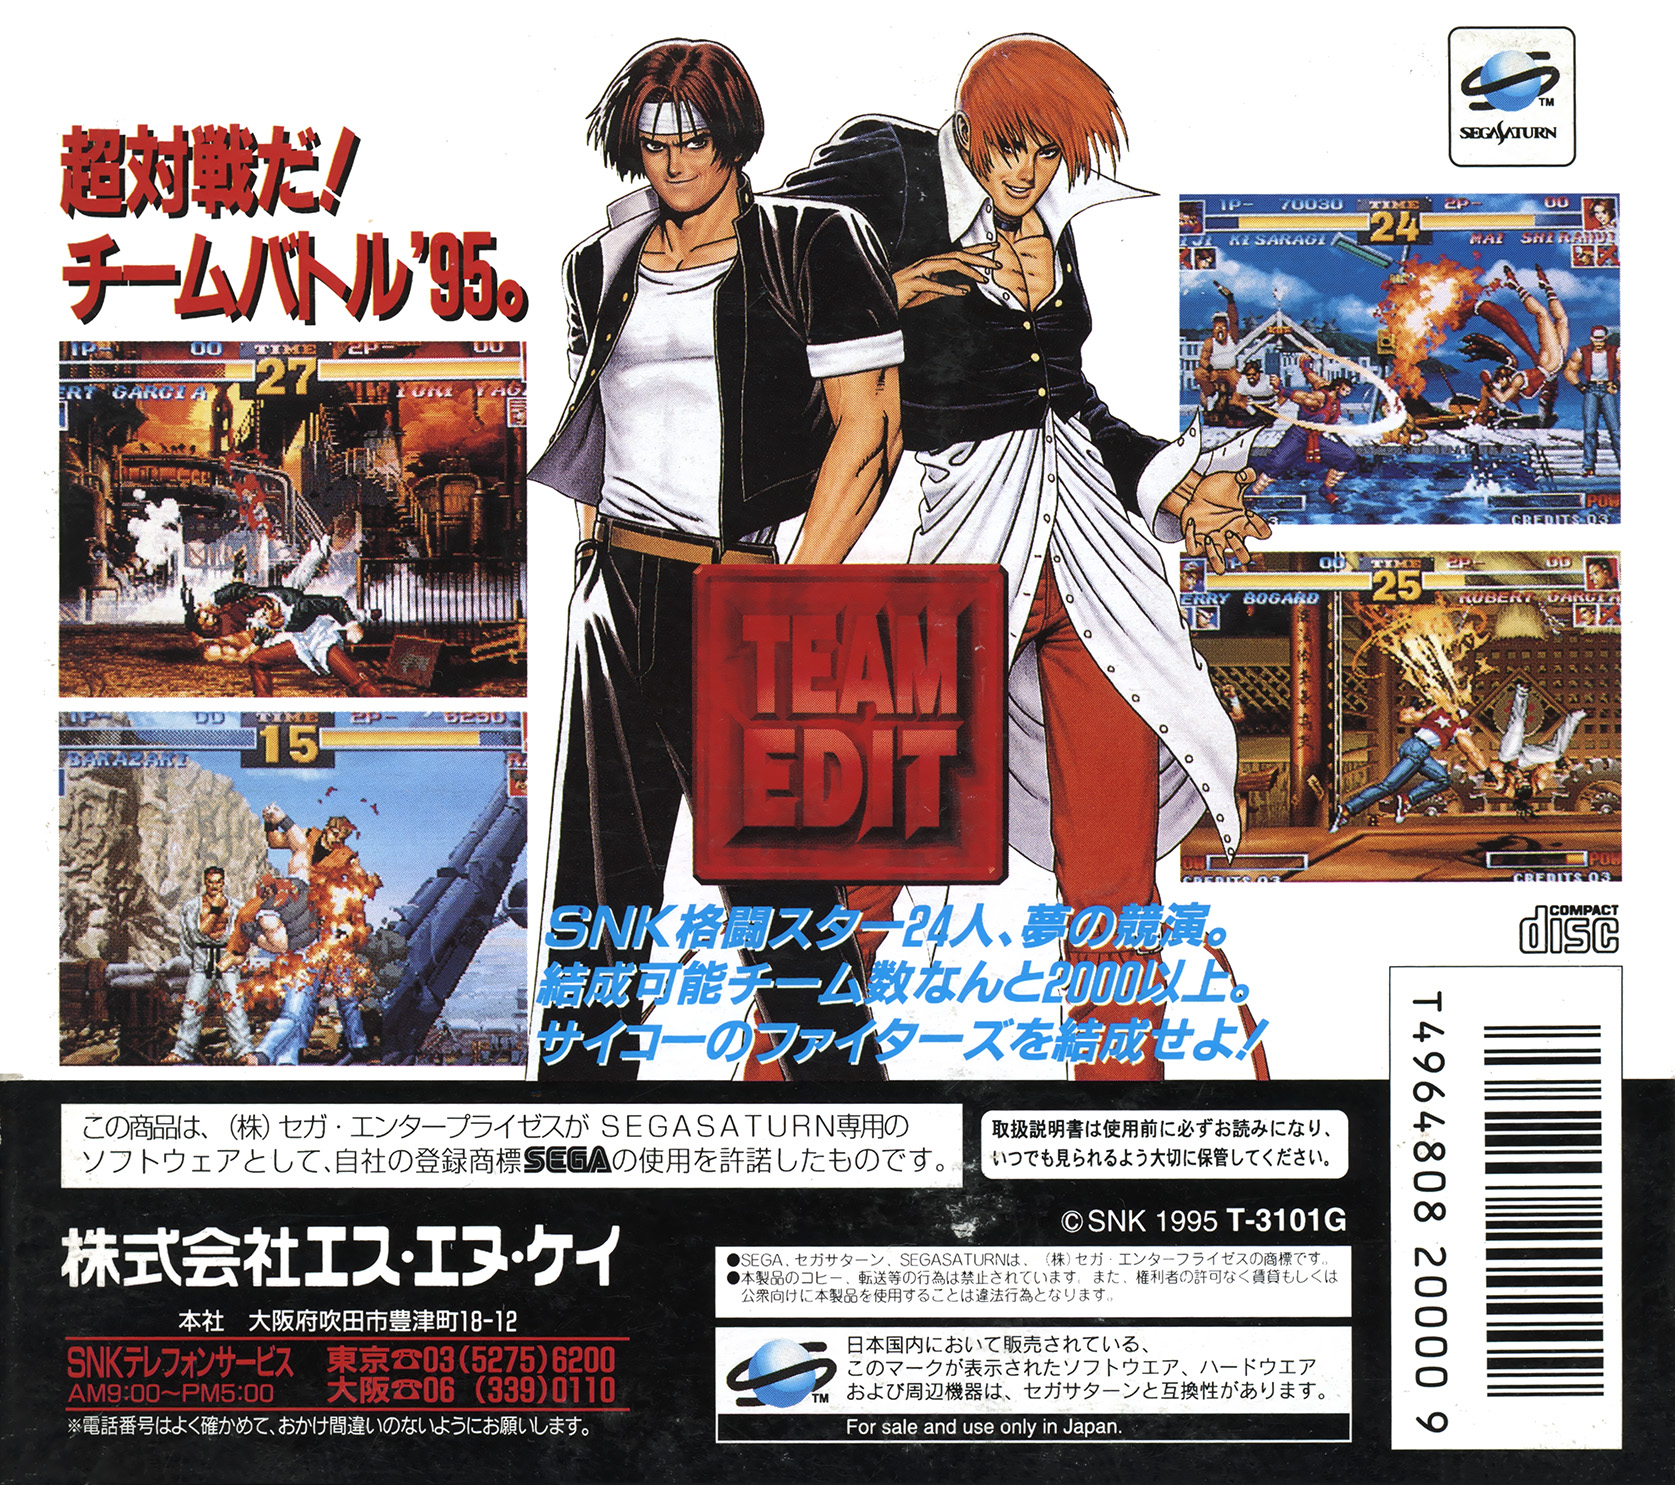 download the king of fighters 95 apk